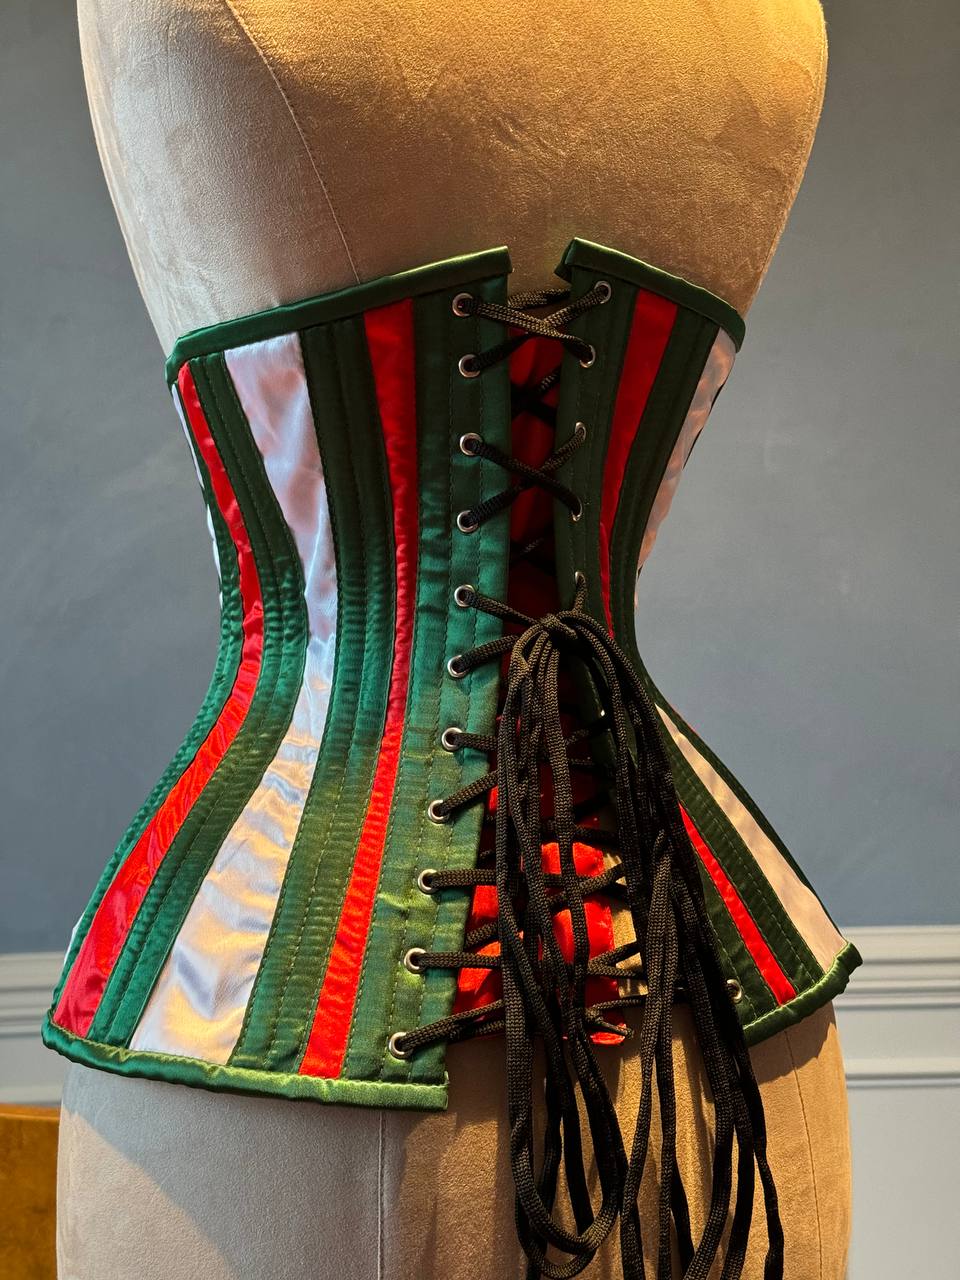 
                  
                    Underbust red and green satin in Santa style with steampunk closure hooks in the front. Corset is made personally according to your measurements.
                  
                